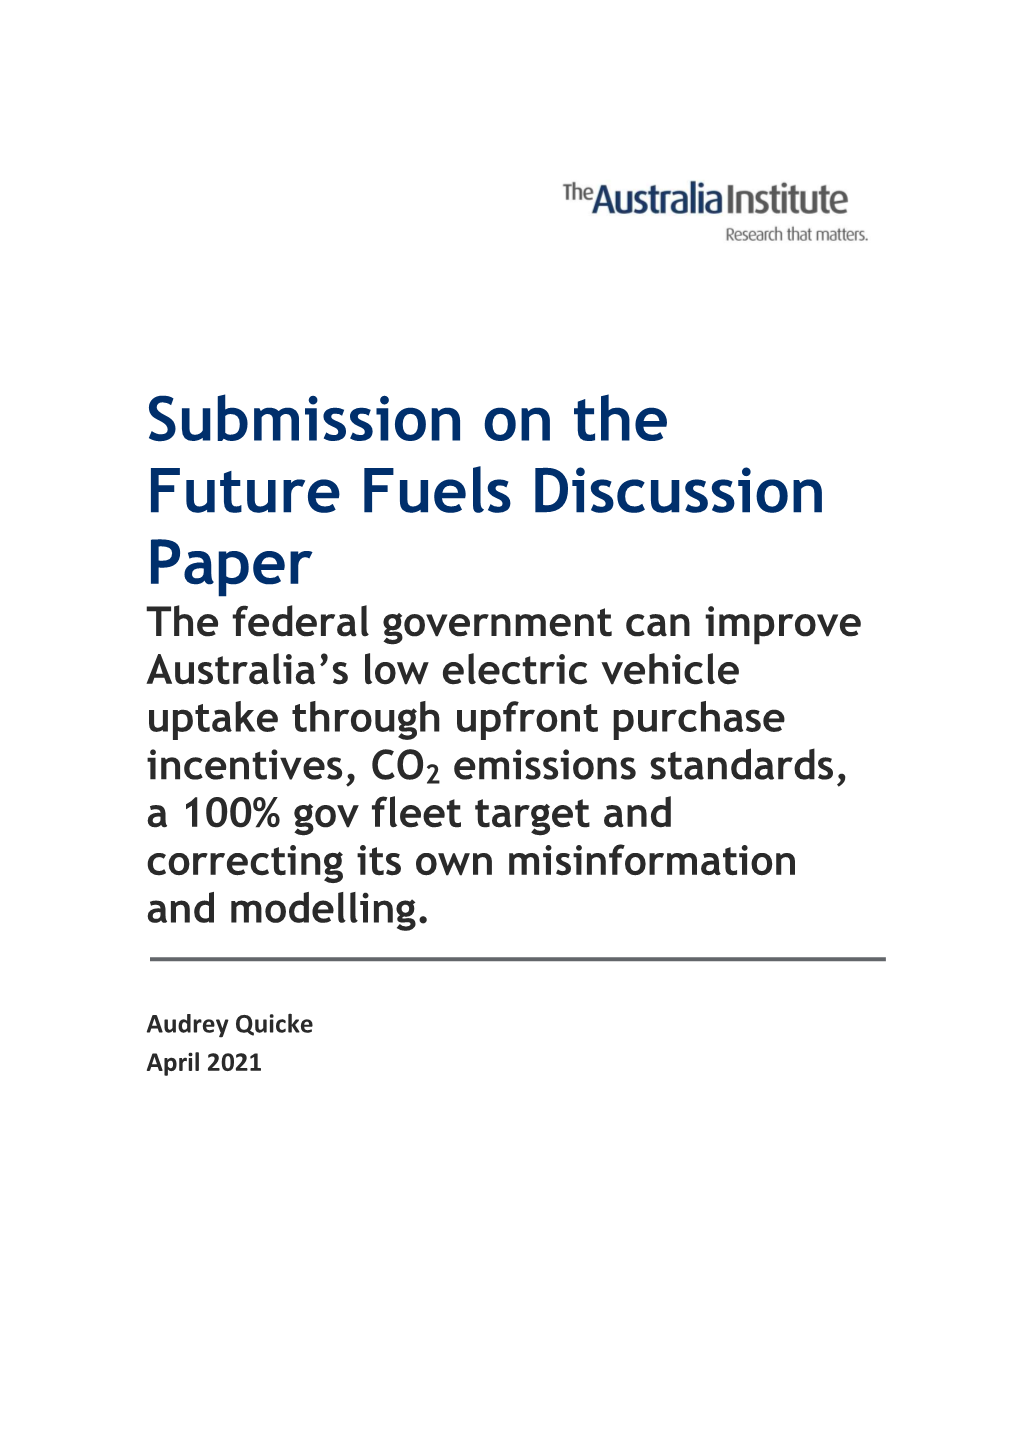 Submission on the Future Fuels Discussion Paper